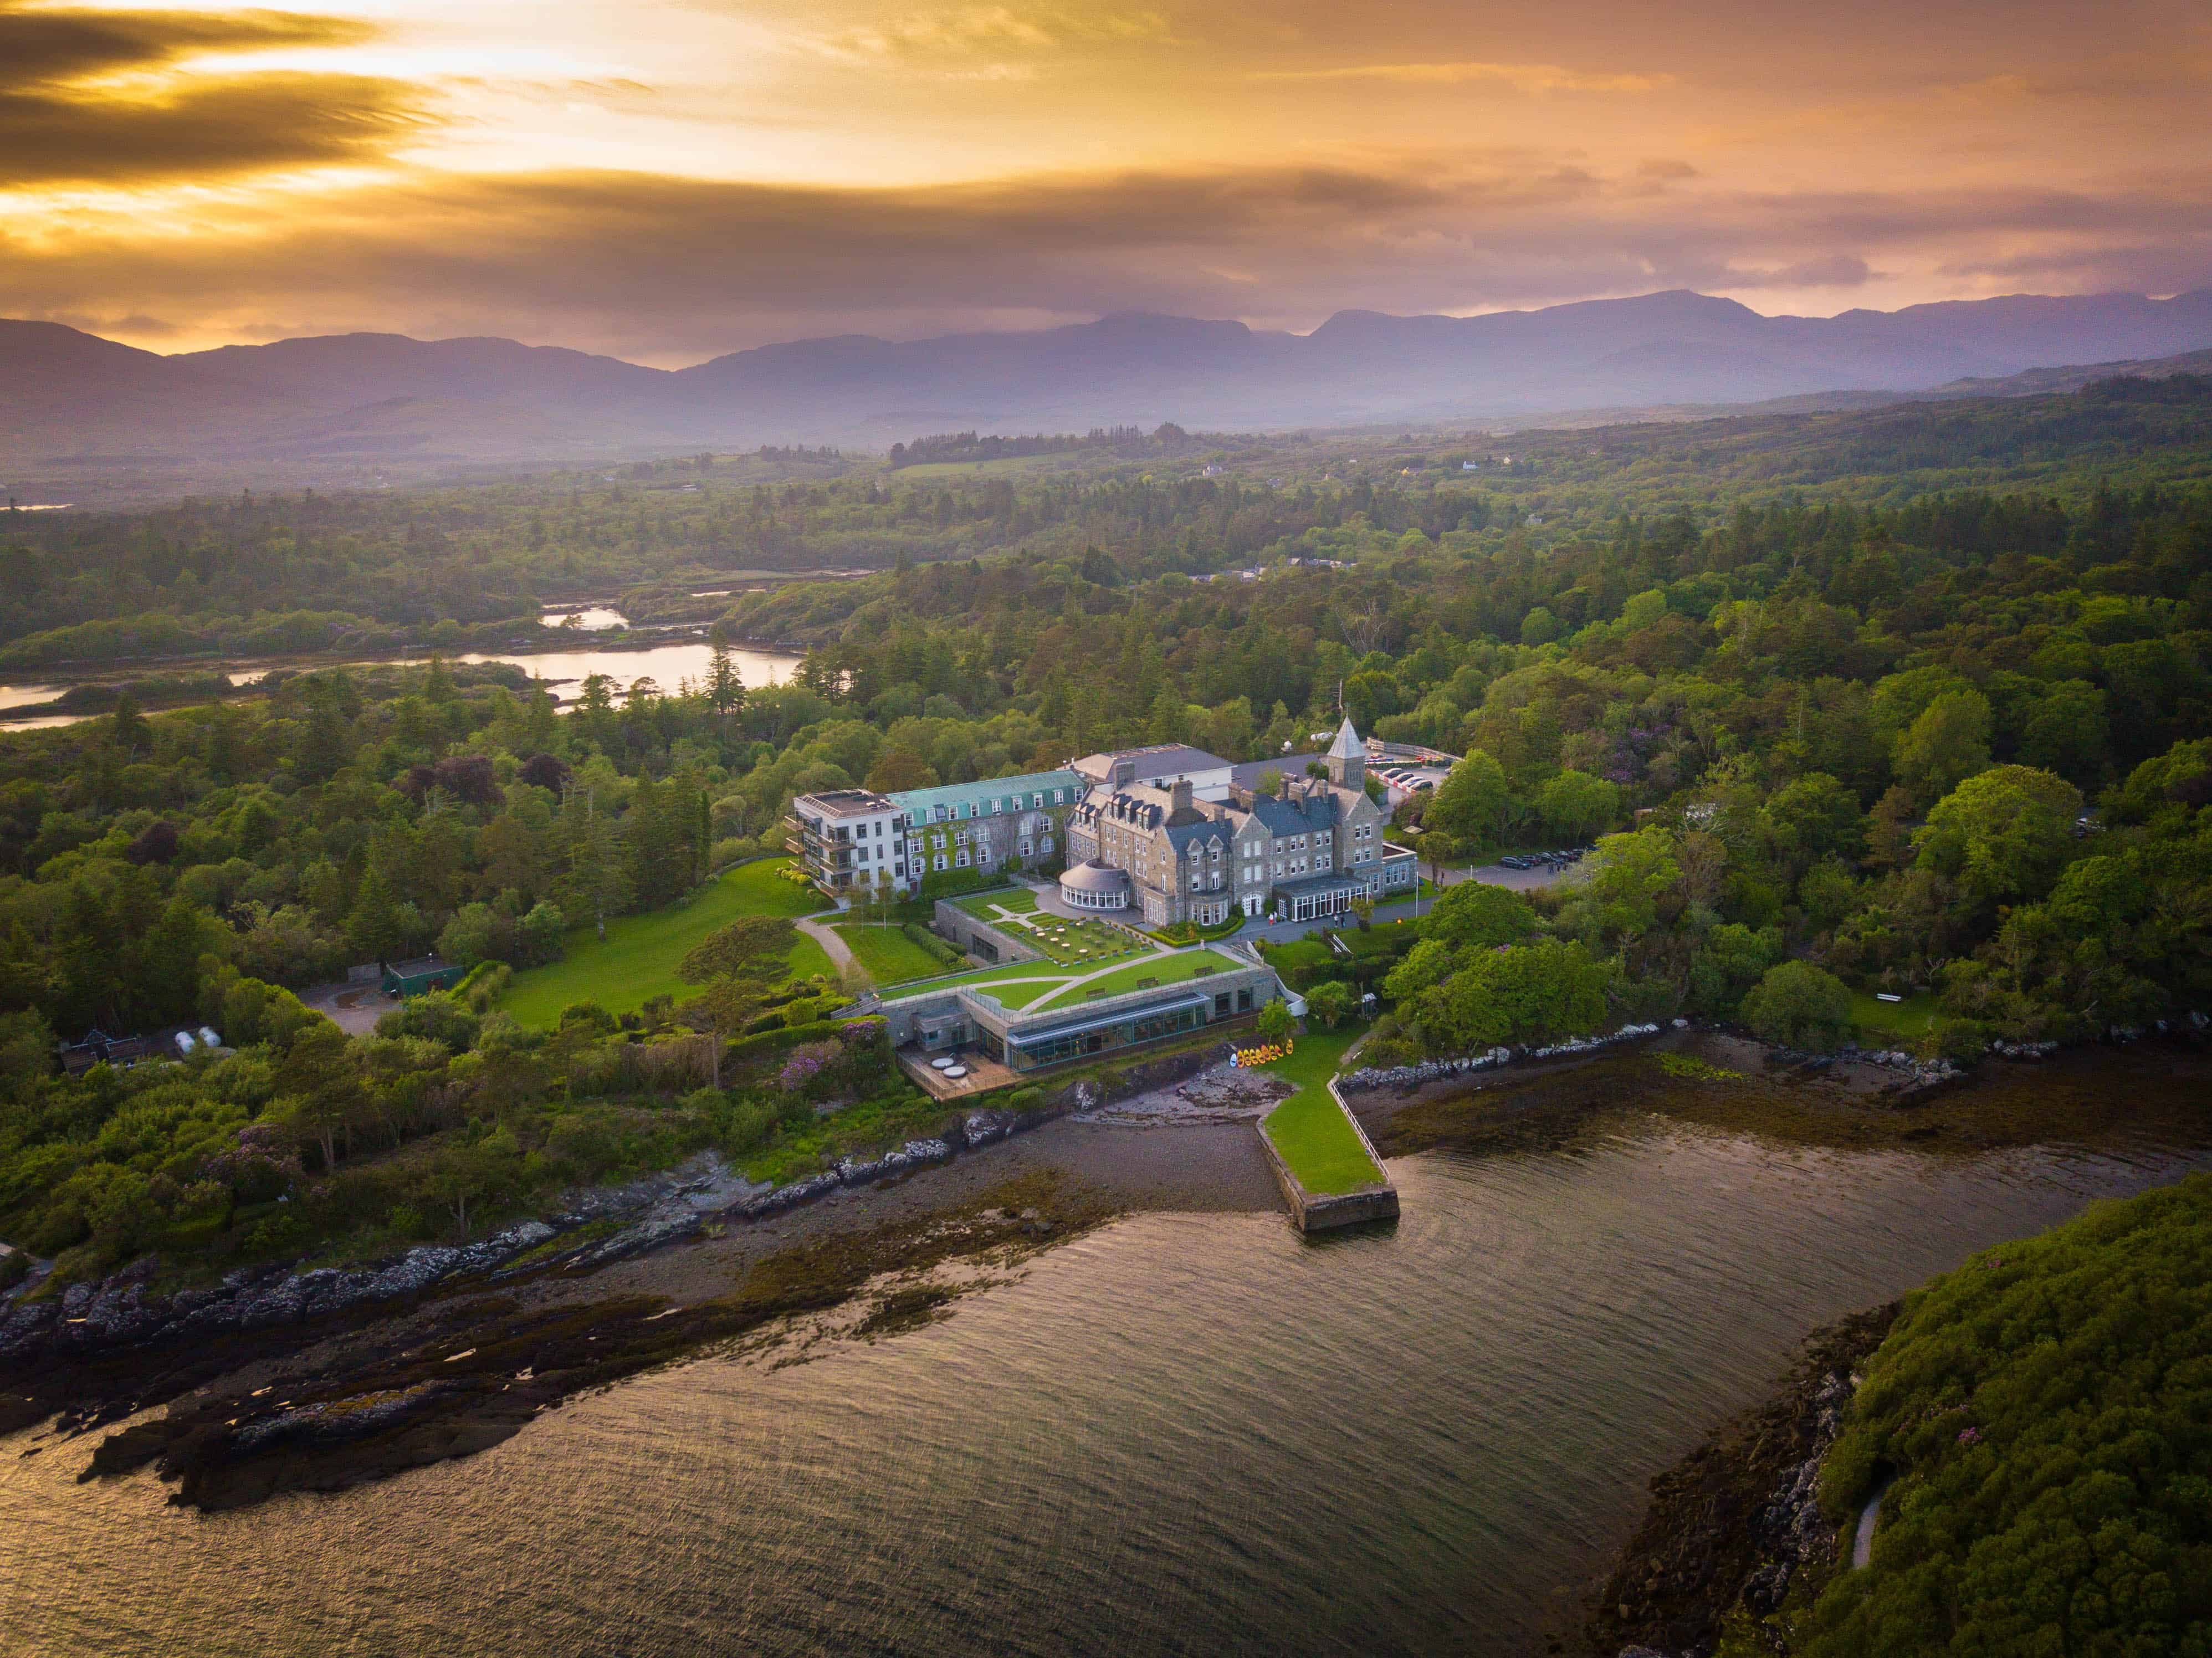 Sunset aerial photo of the Parknasilla Resort & Spa on the water with green trees all around.